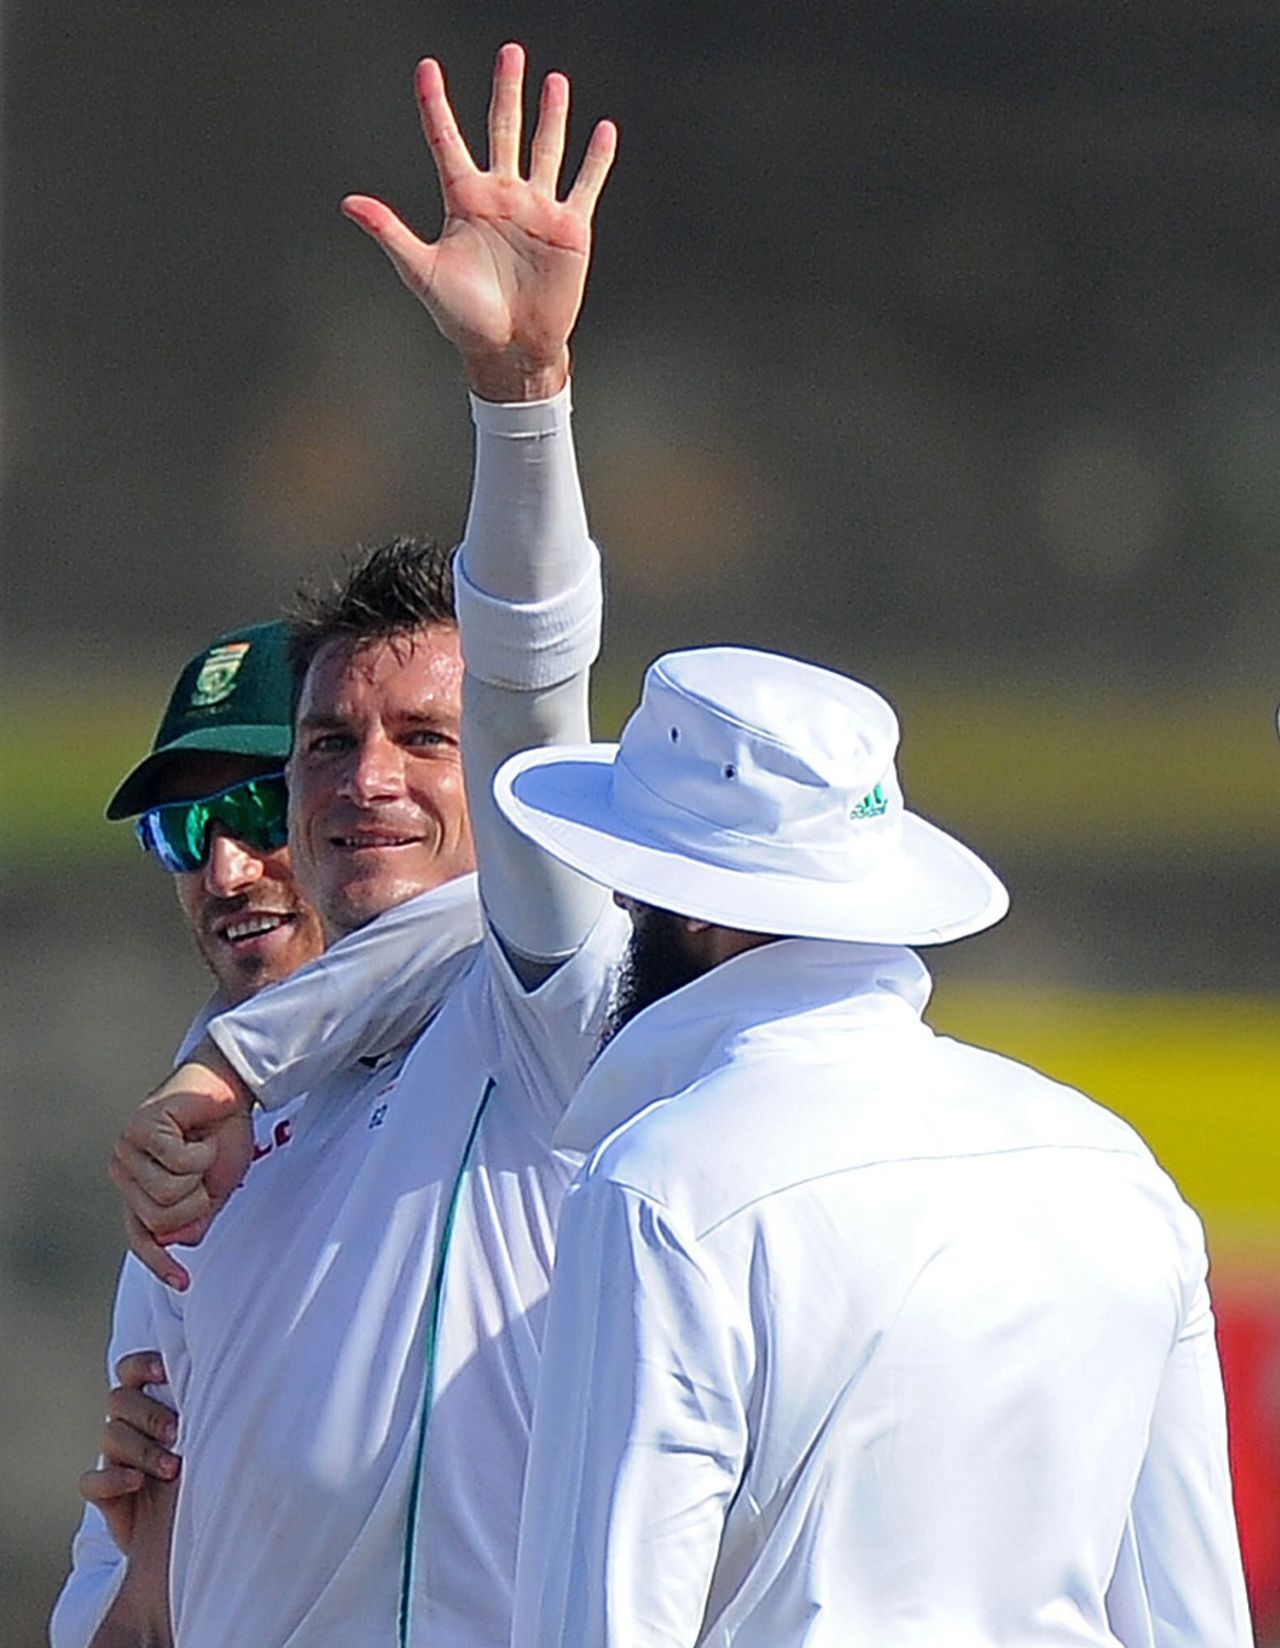 Dale Steyn confirms another five-for in the subcontinent, Sri Lanka v South Africa, 1st Test, Galle, 3rd day, July 18, 2014